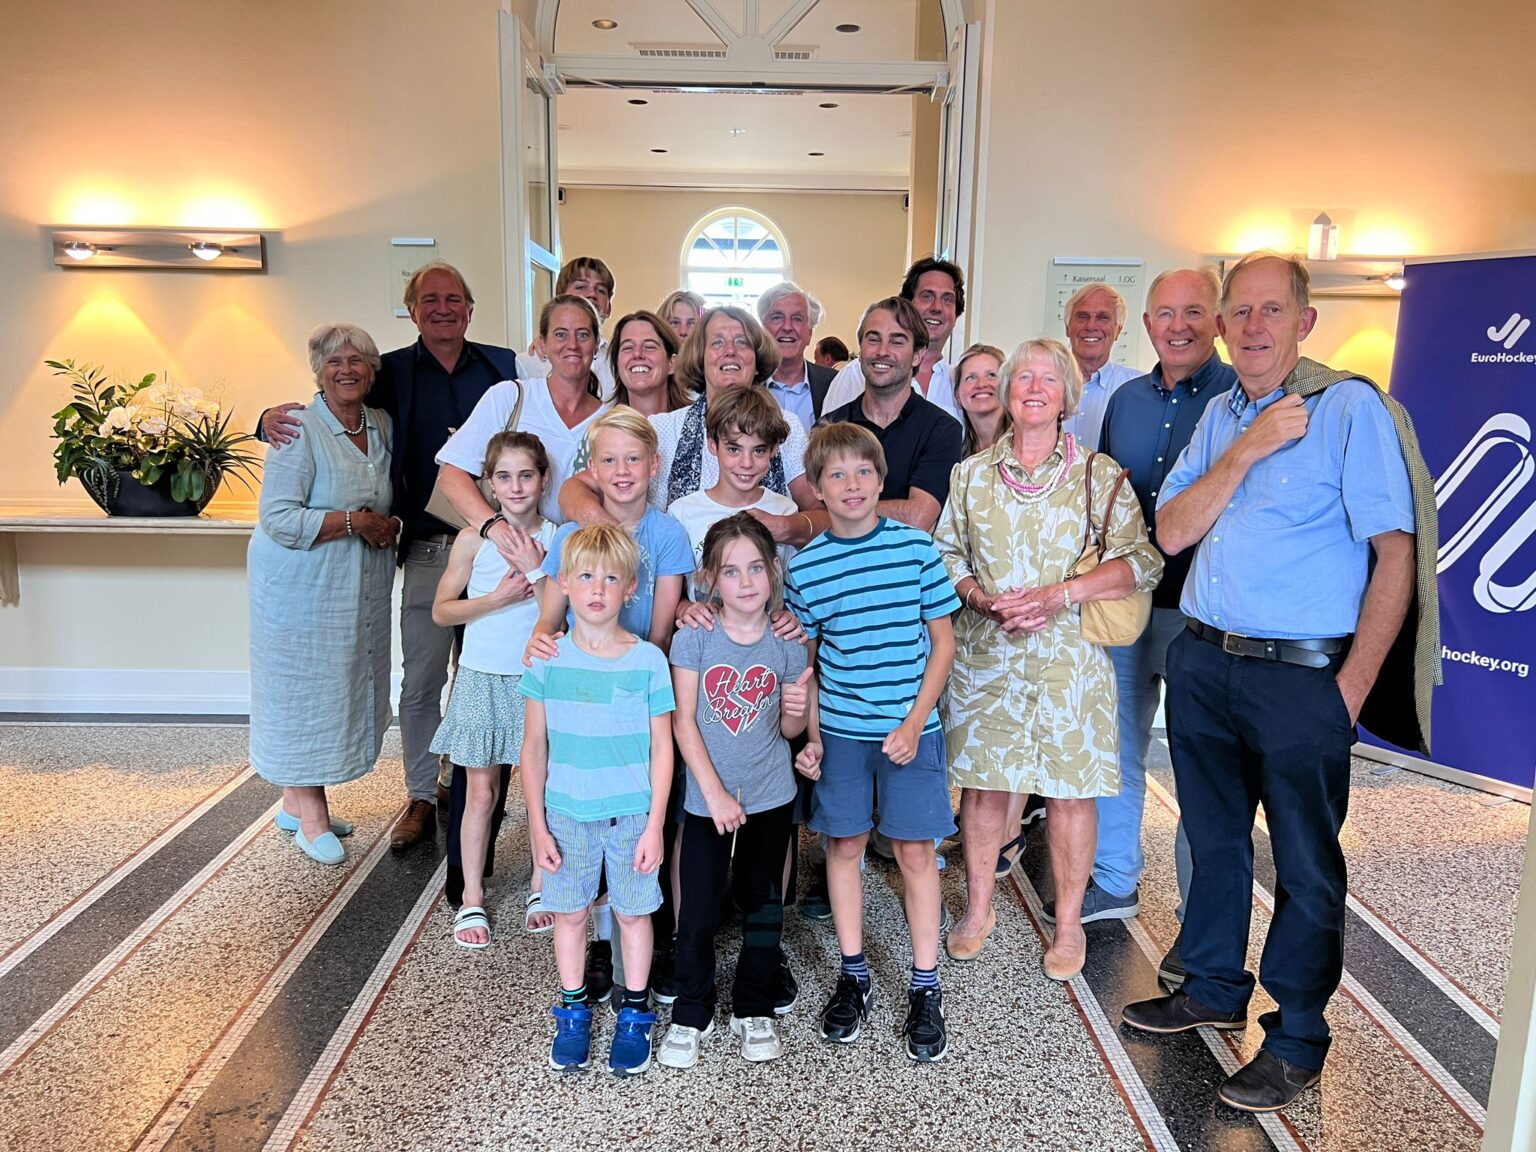 Marijke Fleuren, pictured centre with her family, reached the maximum 12 years as EHF President, and was named Honorary Life President ©EuroHockey